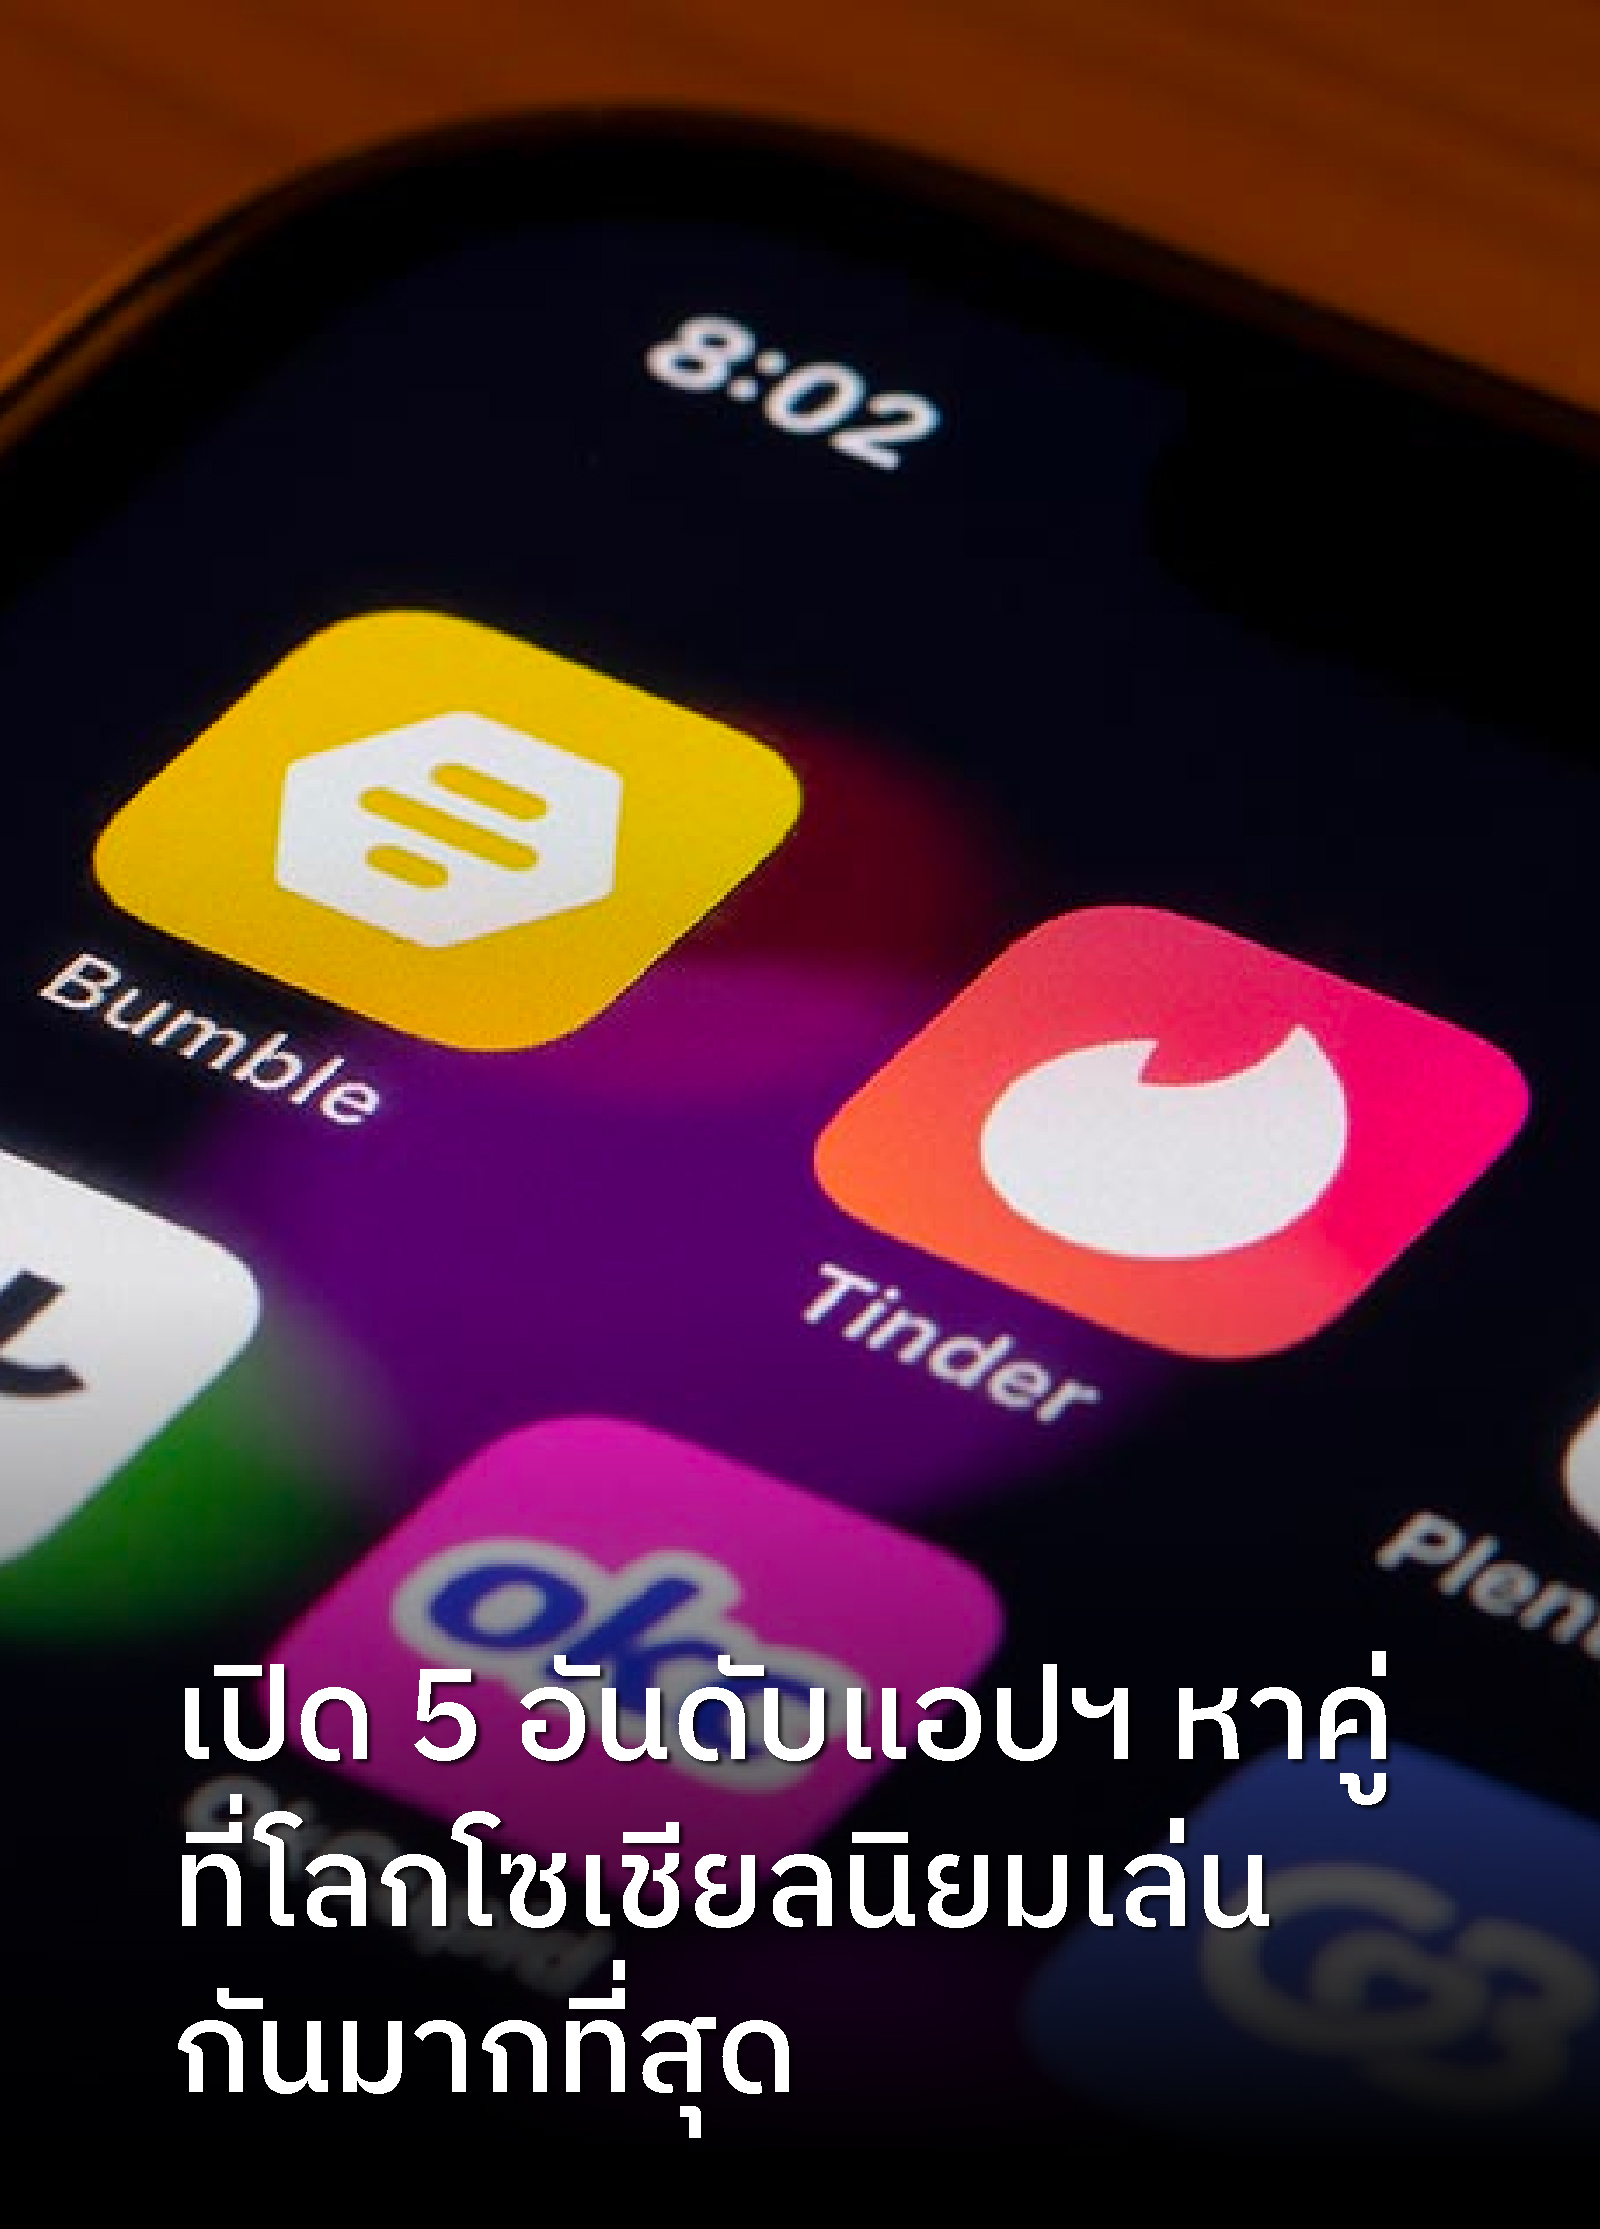 Business-the-most-mentioned-dating-app-among-Thai-social-media-users